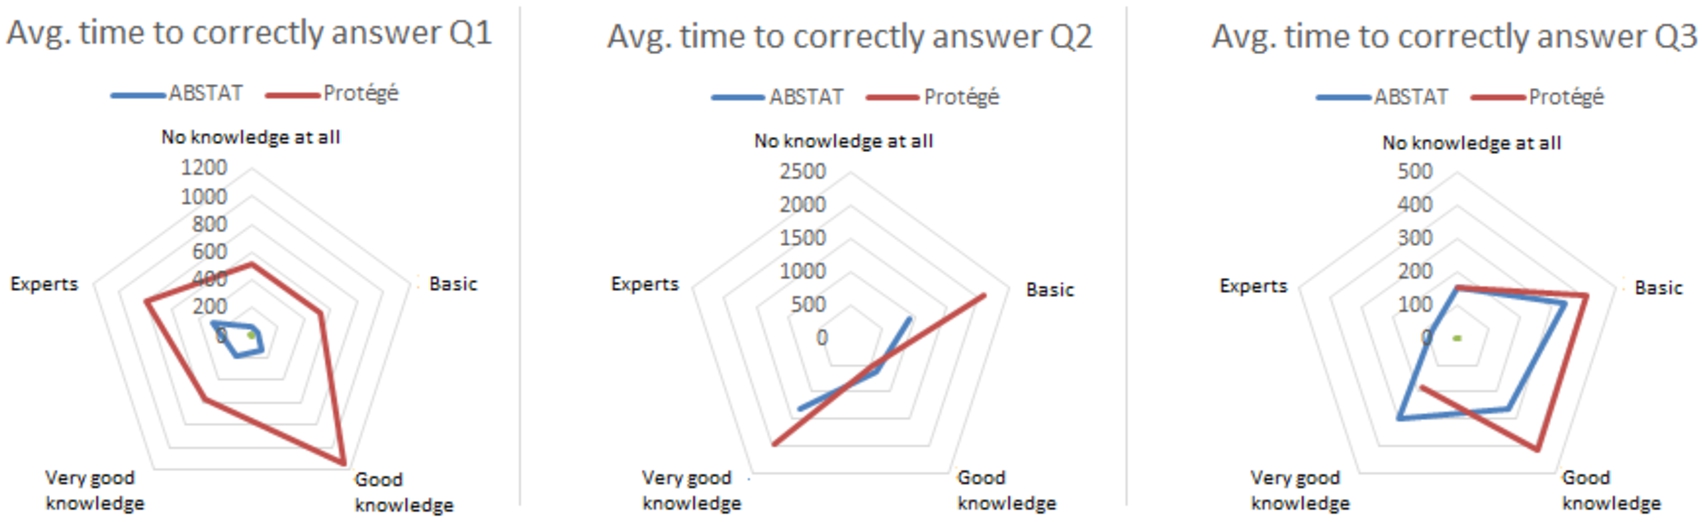 The average time (sec) in answering correctly to the queries for both groups with respect to their SPARQL knowledge.